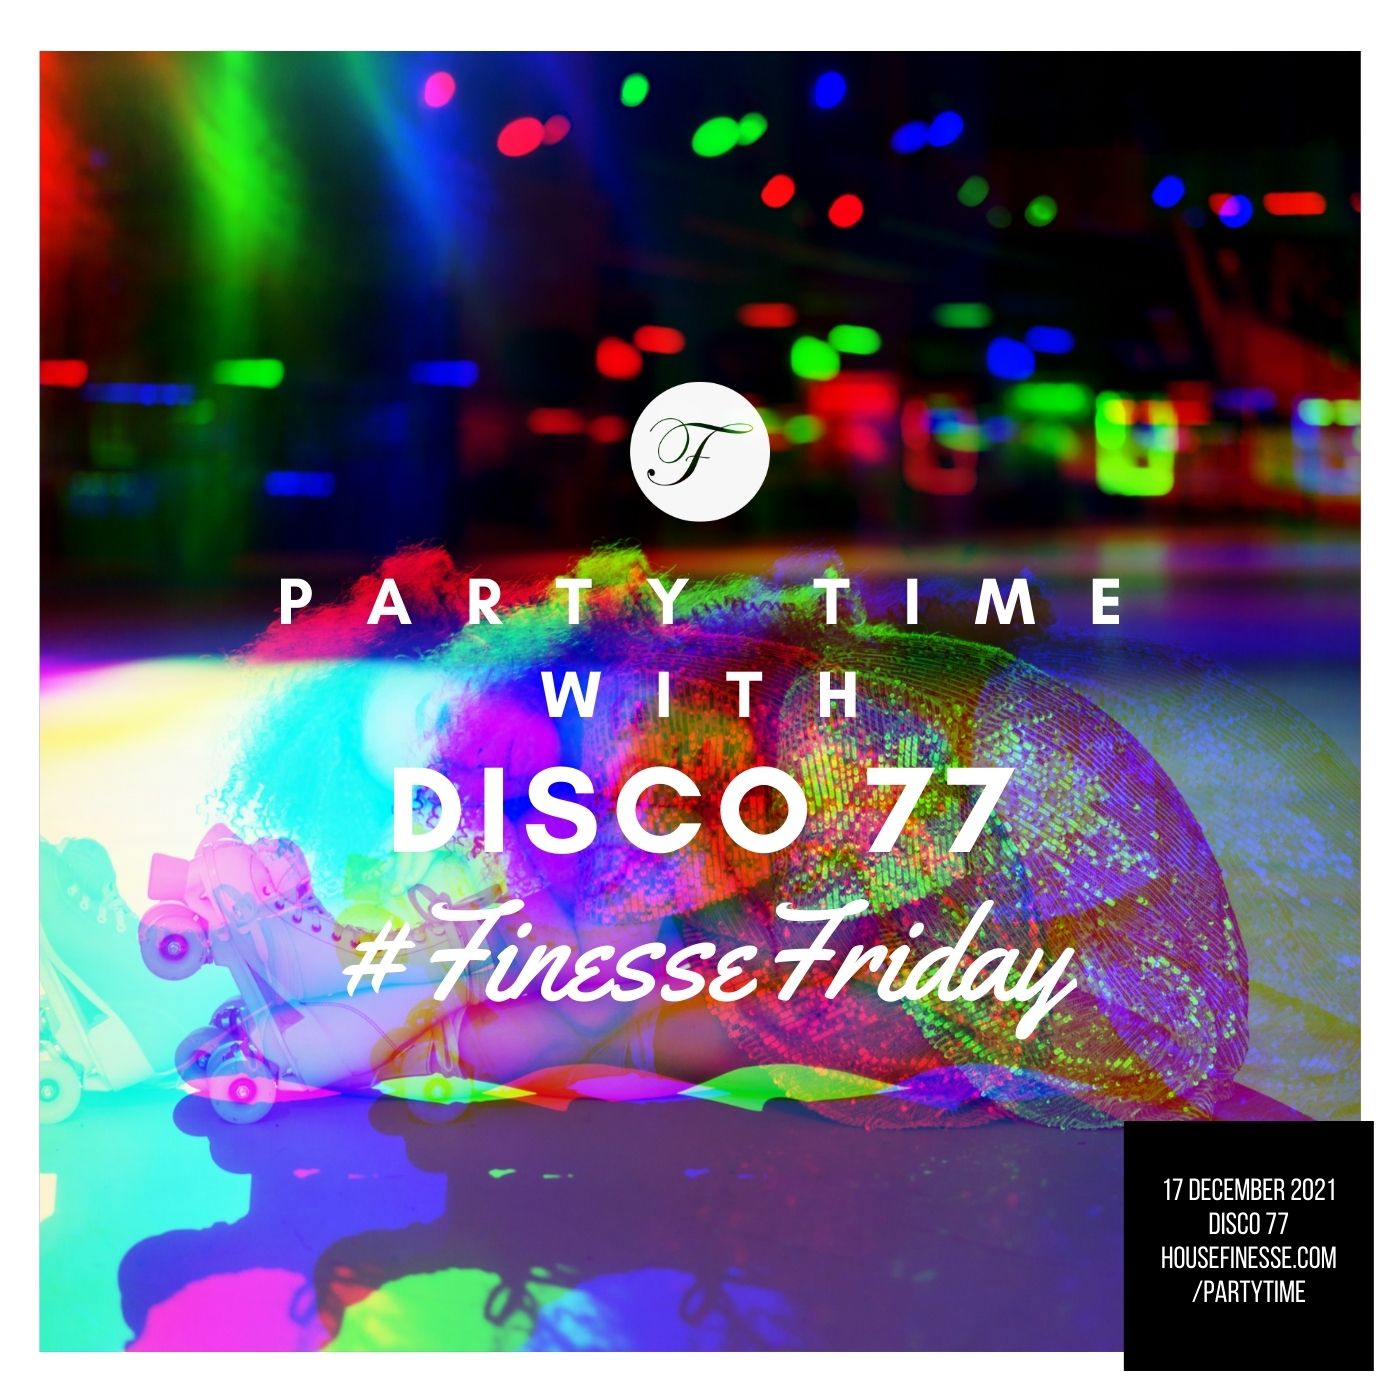 #FinesseFriday - Party Time with Disco77